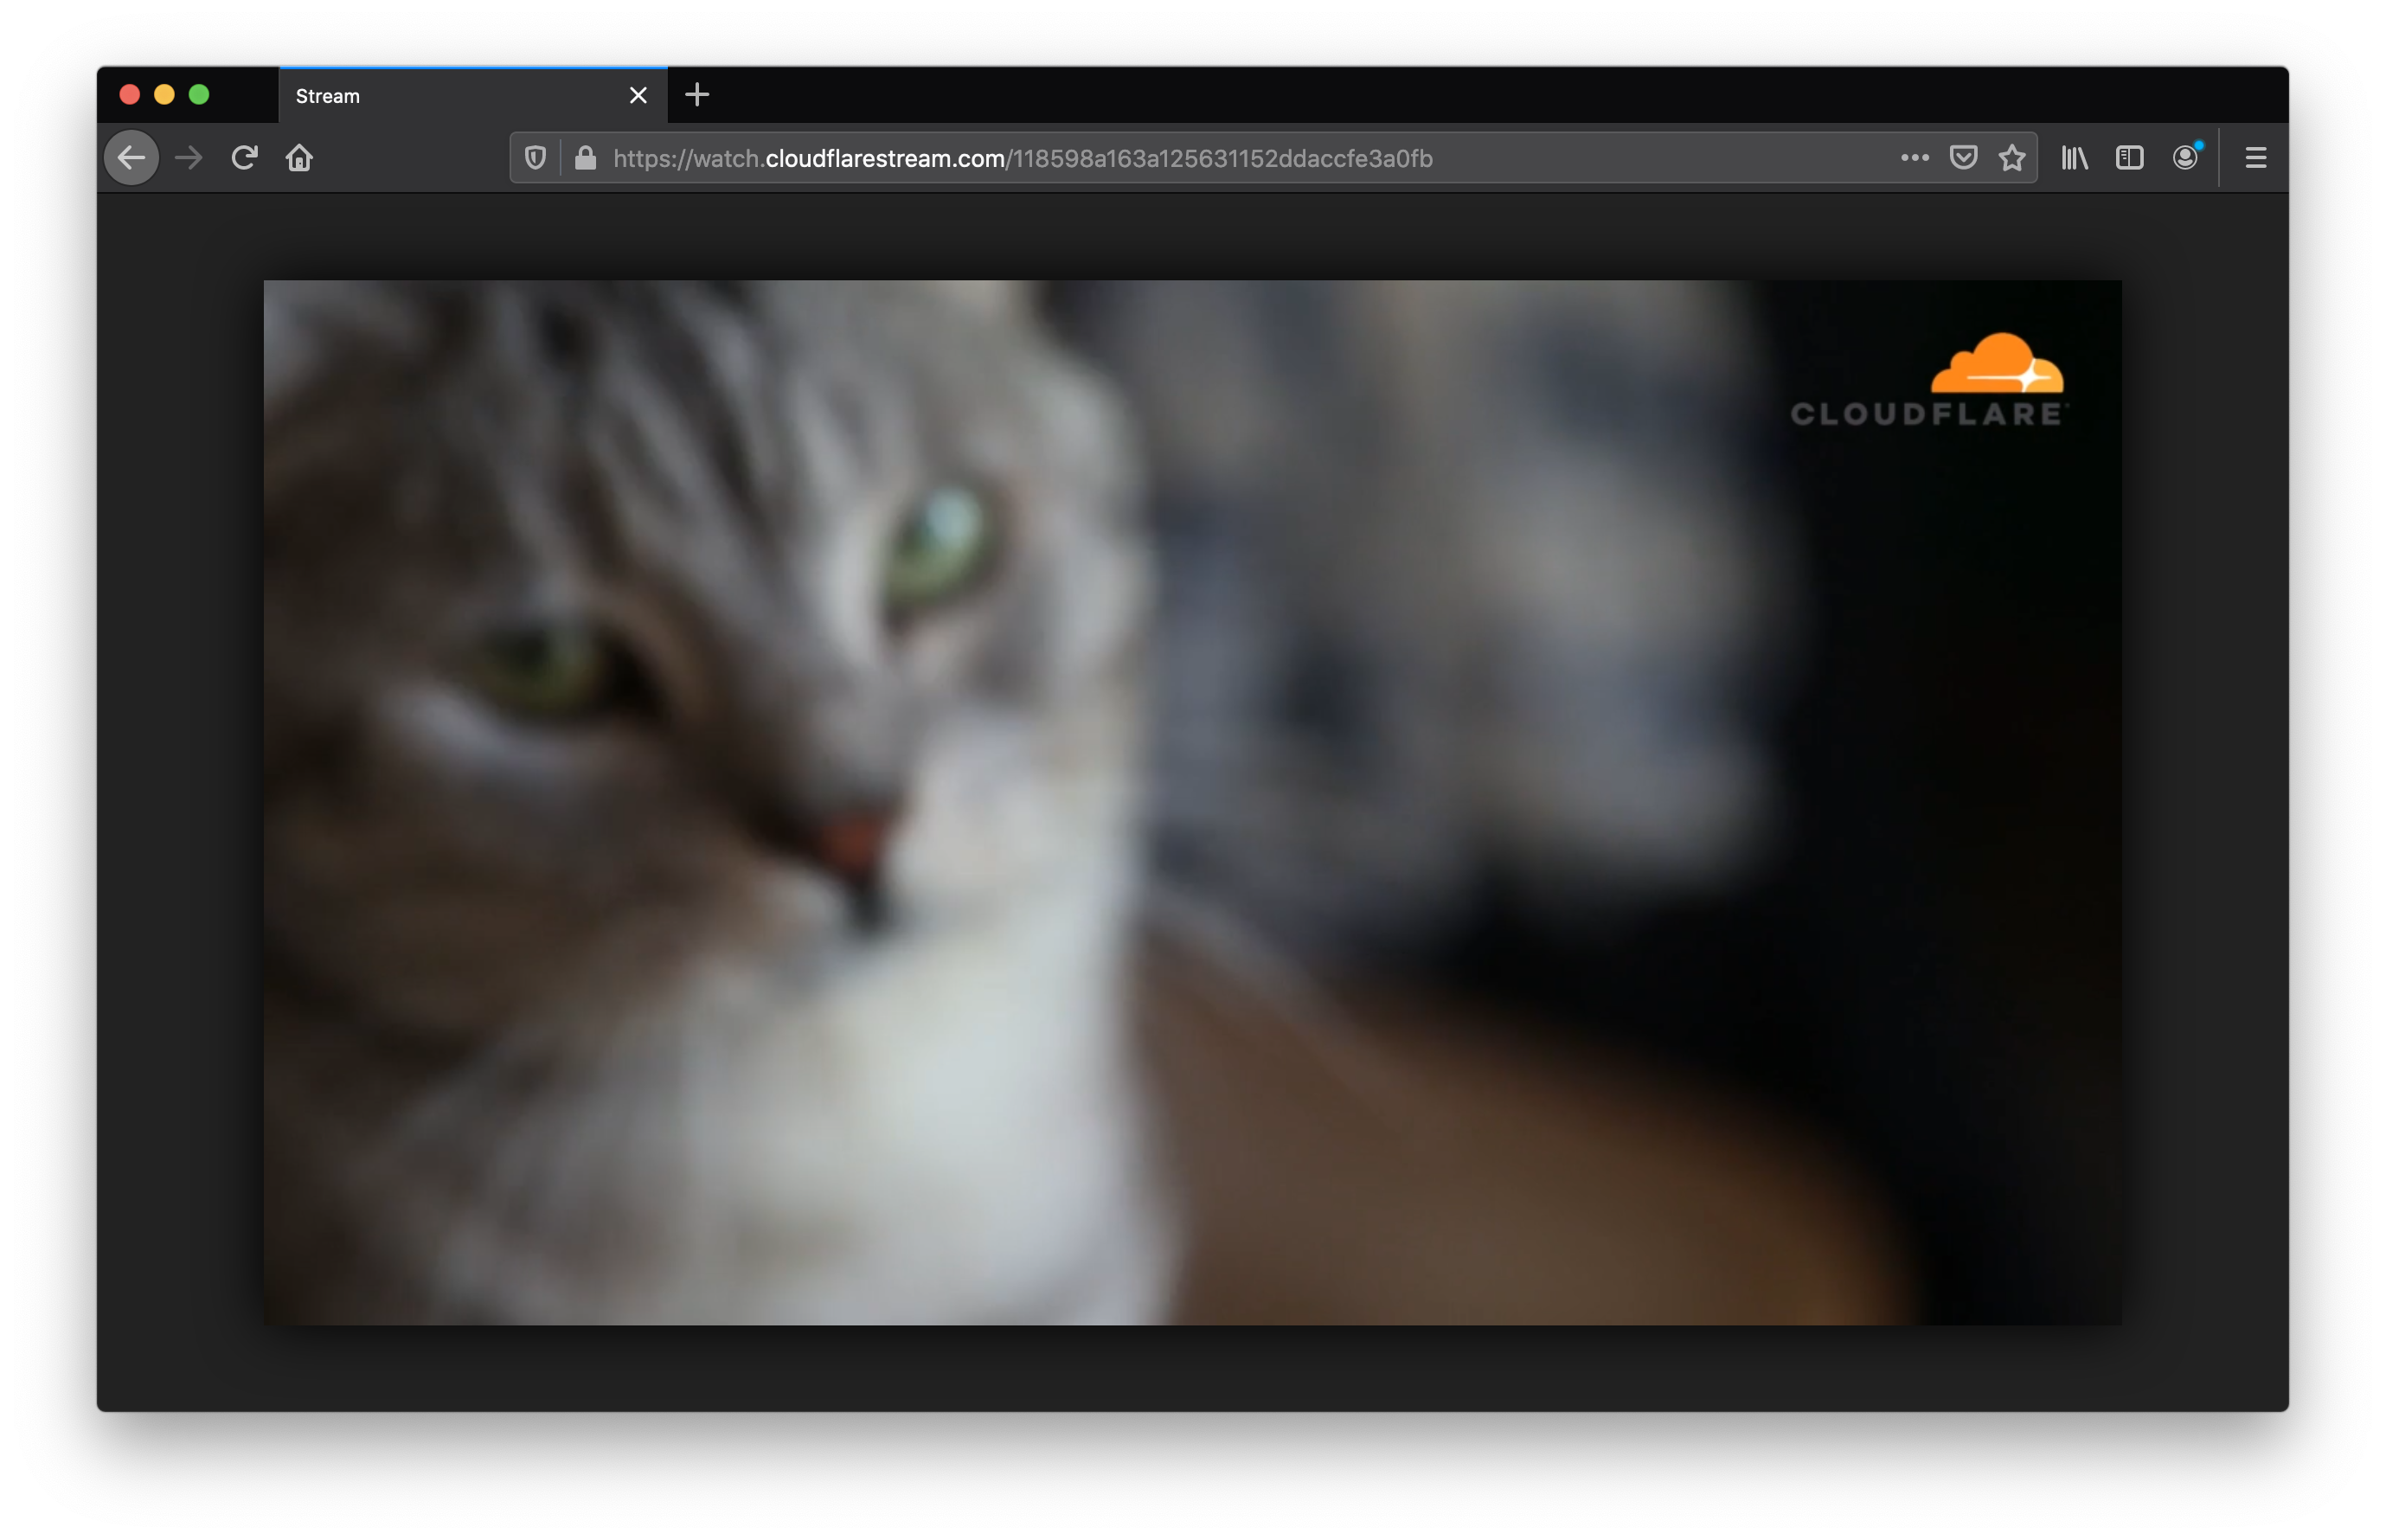 Screenshot of a video with Cloudflare watermark at top right